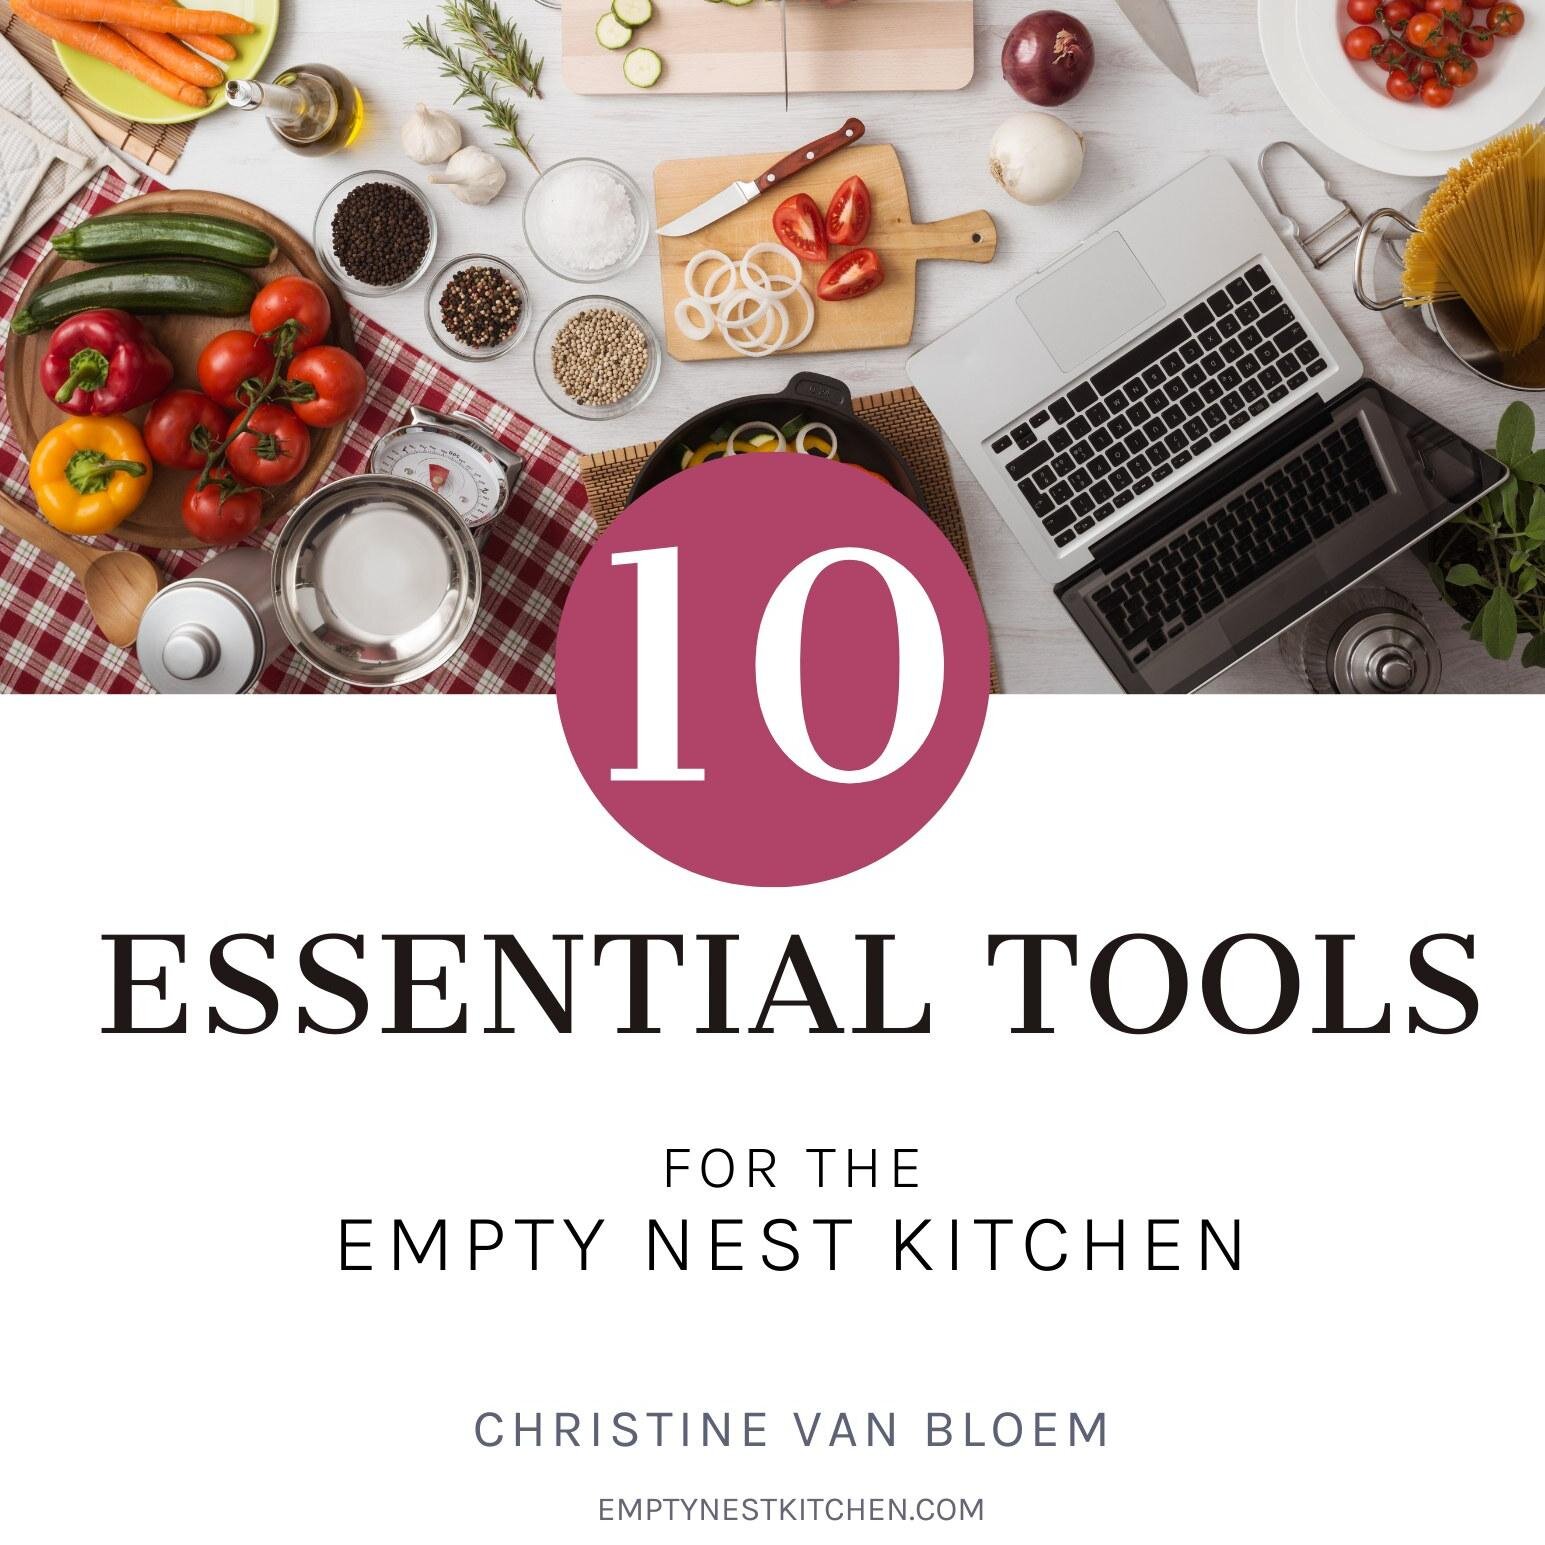 If you're like me, you're always looking for the little things that will making cooking easier and more fun. Well look no further friend! I've created a guide of the Essential Tools for the Empty Nest Kitchen. It's a winner (if I do say so myself!). 